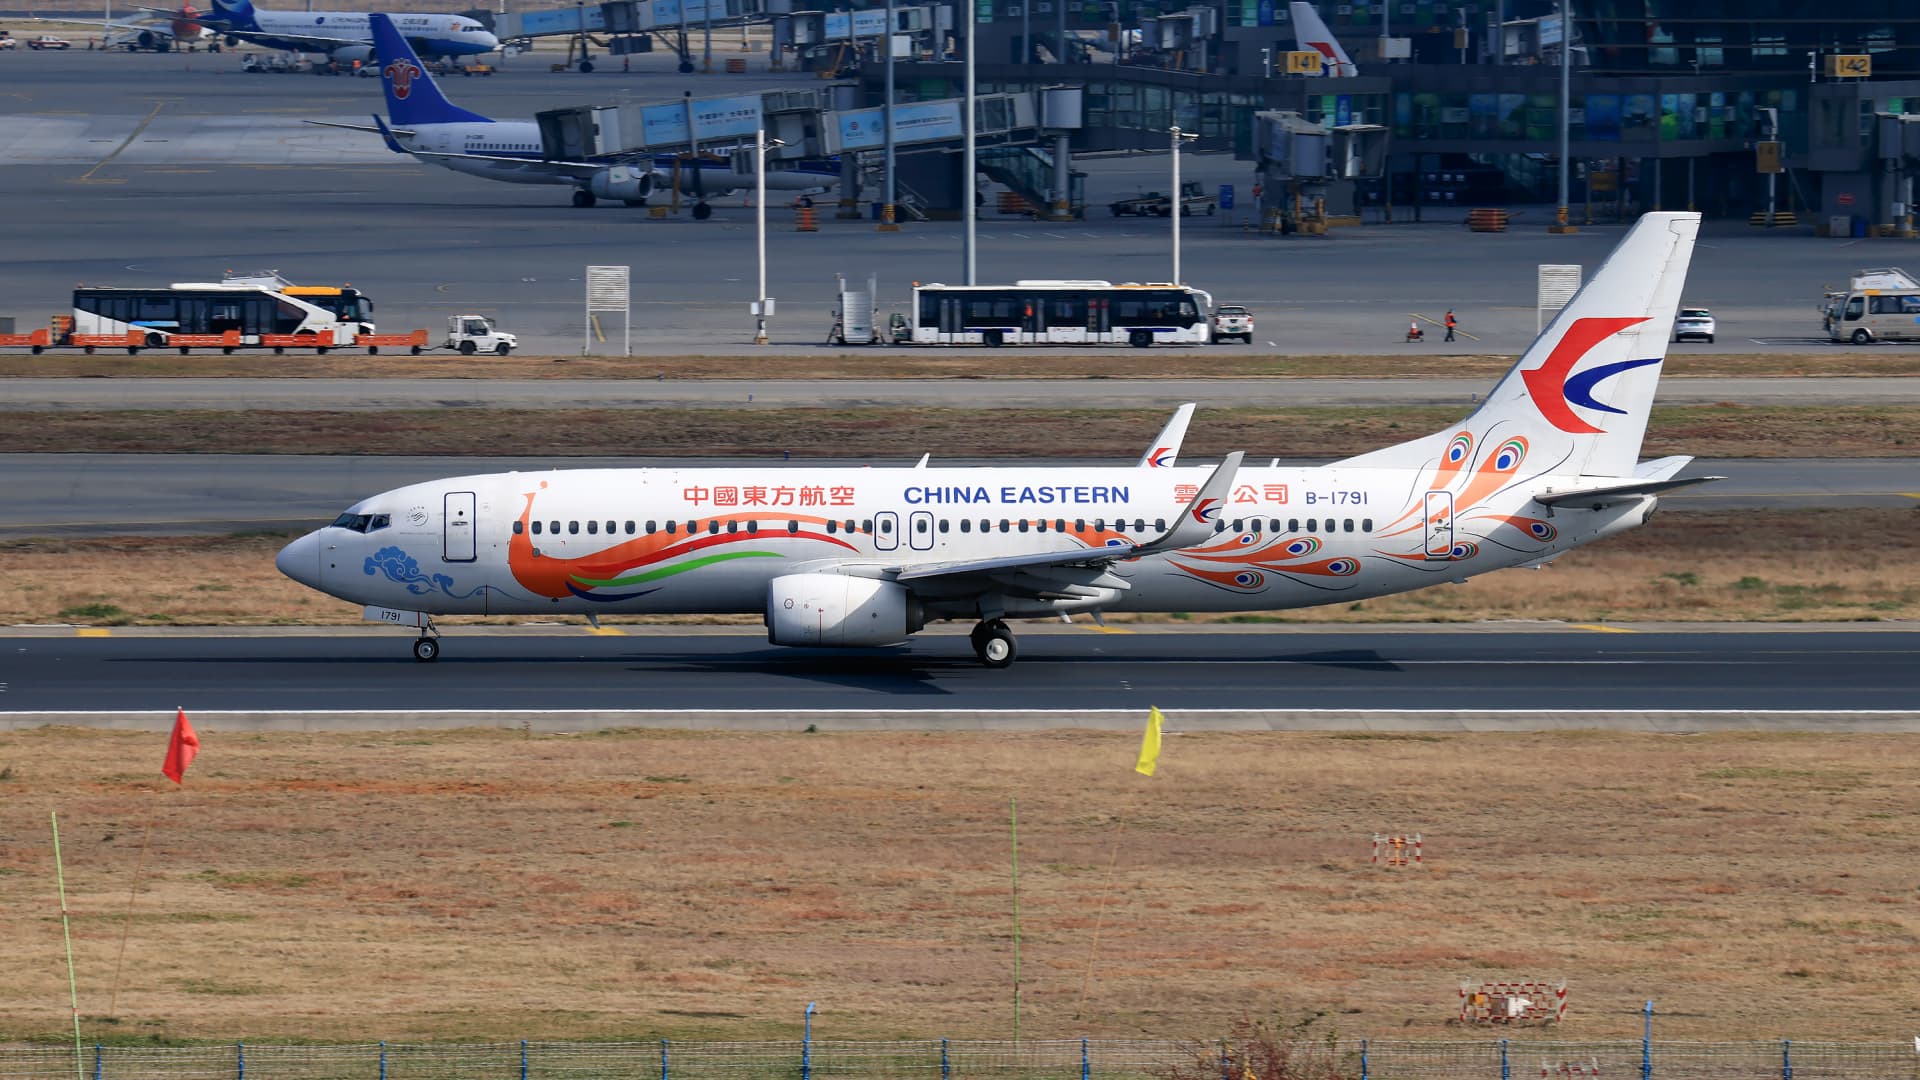 Boeing 737 passenger jet crashes in China with 132 people on board